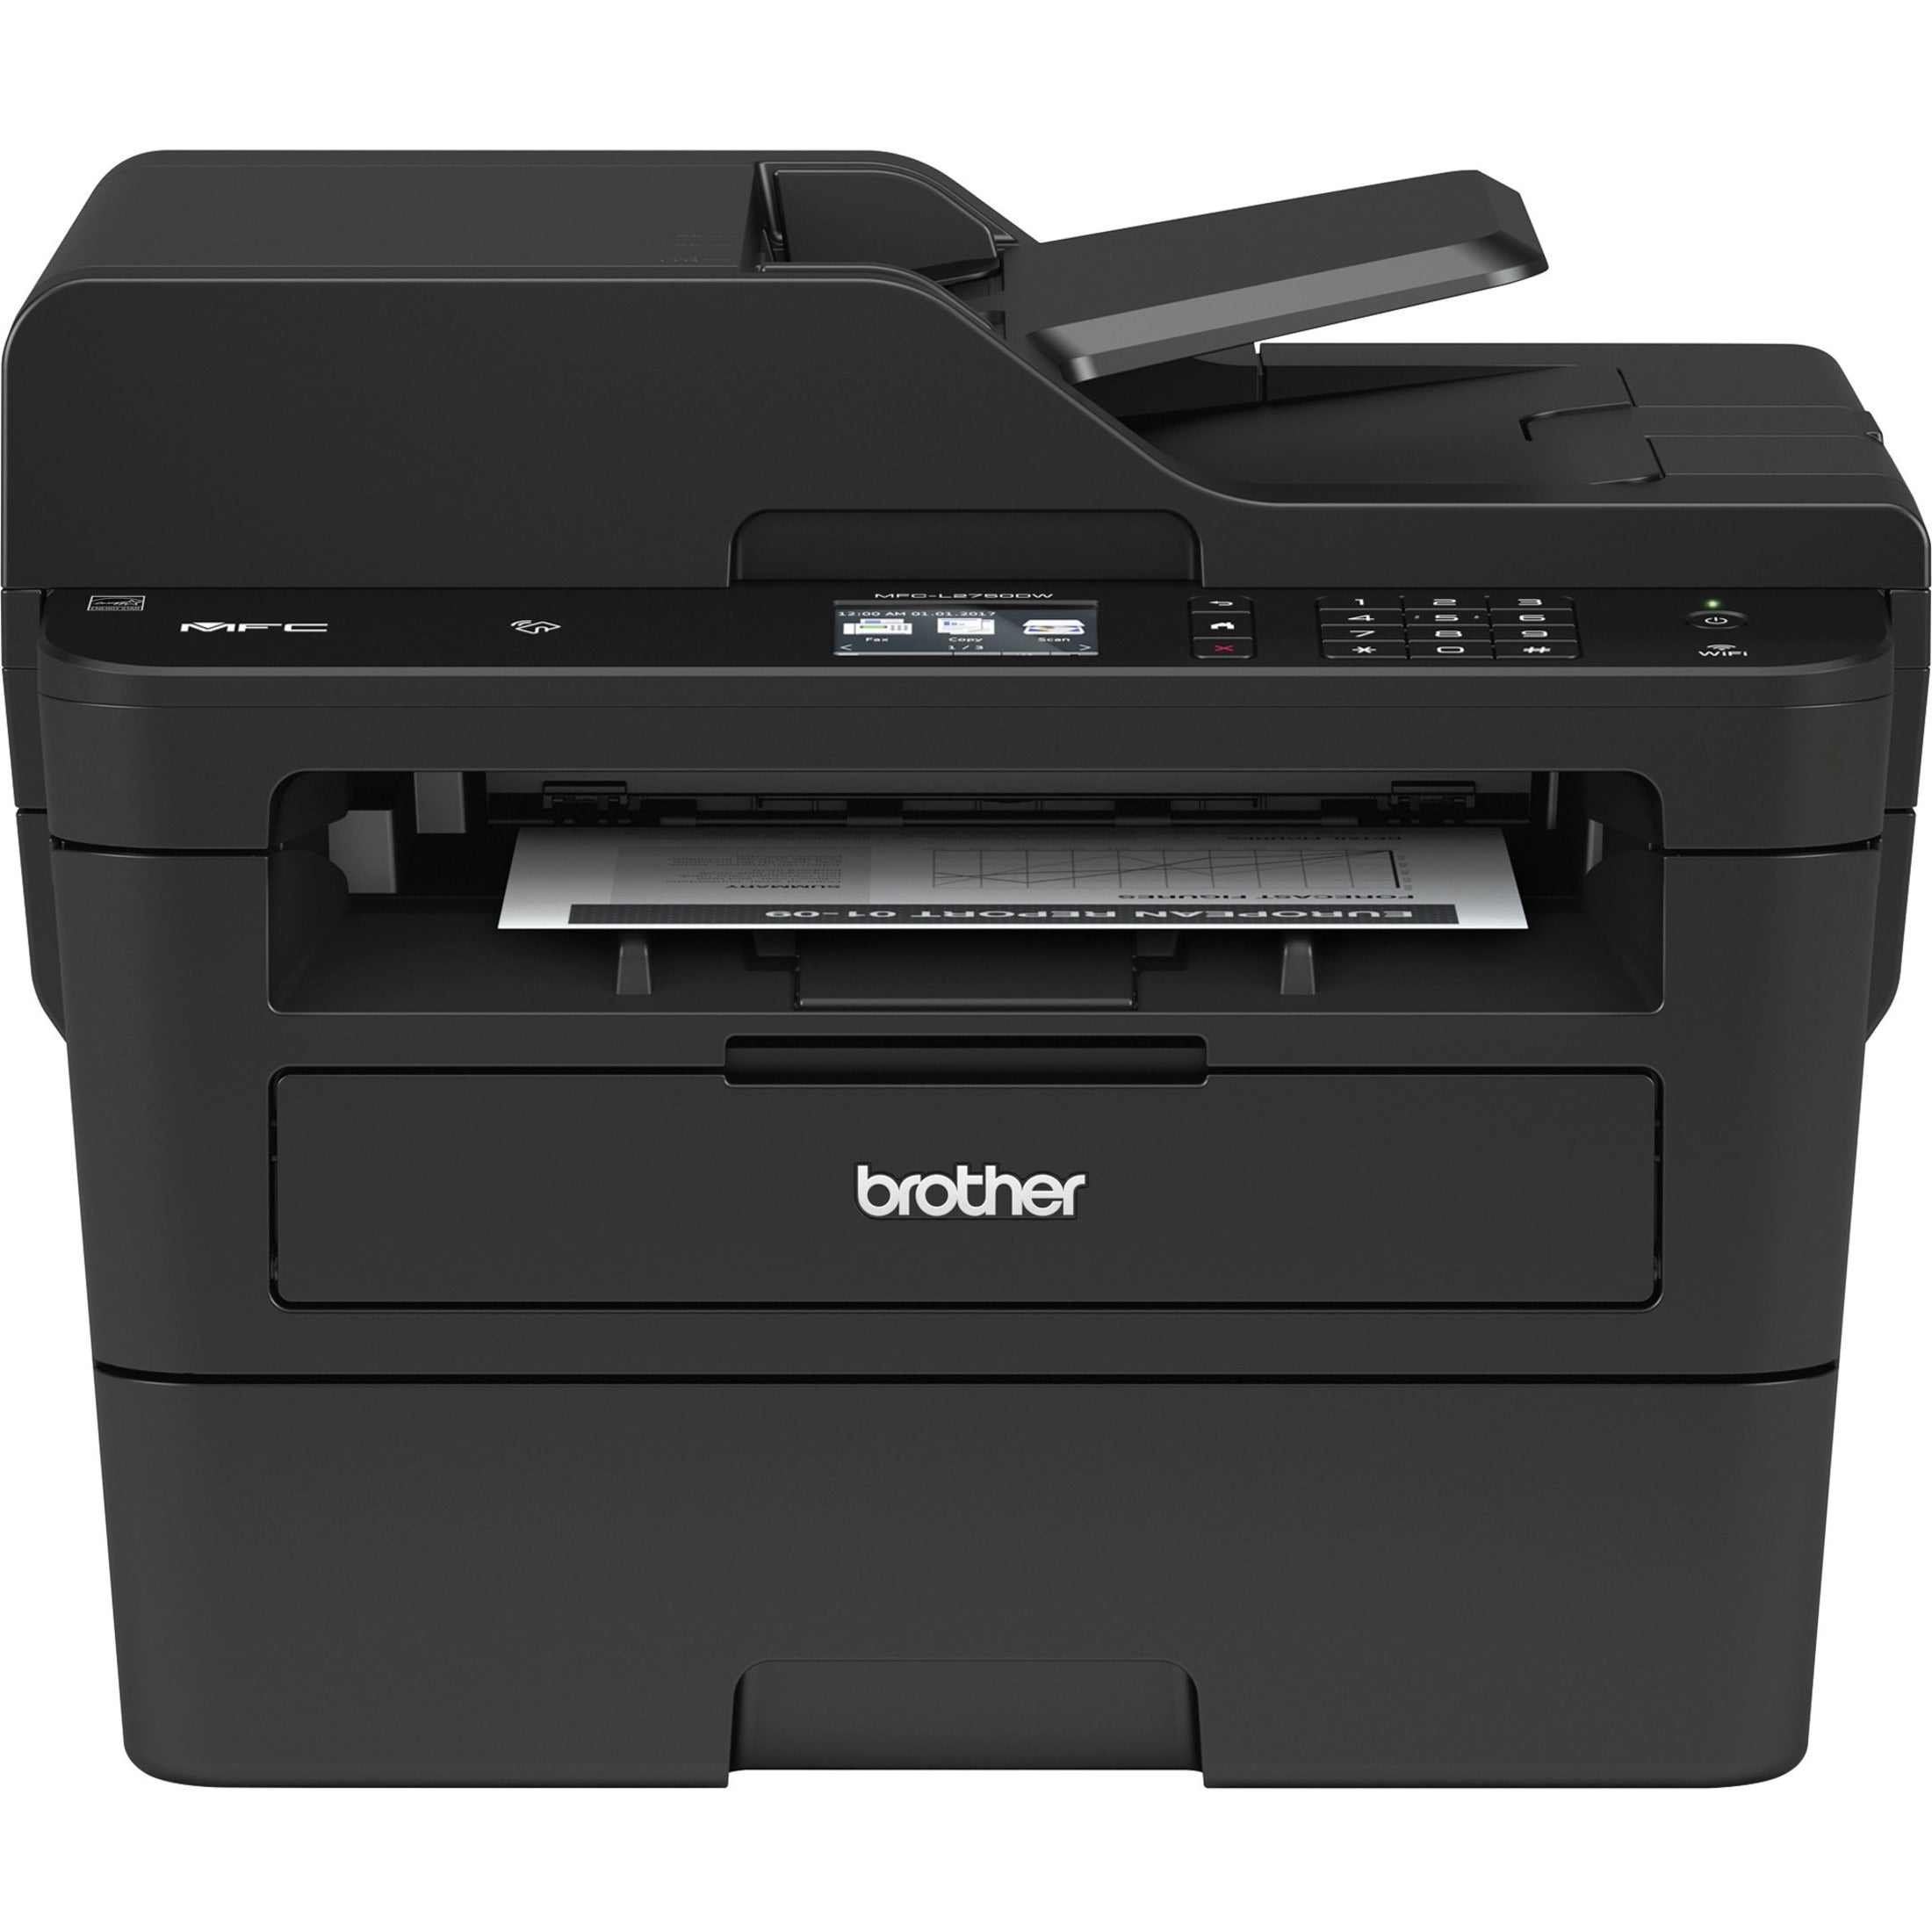 Brother MFC-L2750DW Multifunction Monochrome Laser Printer, 2.7 Touchscreen, 36 ppm